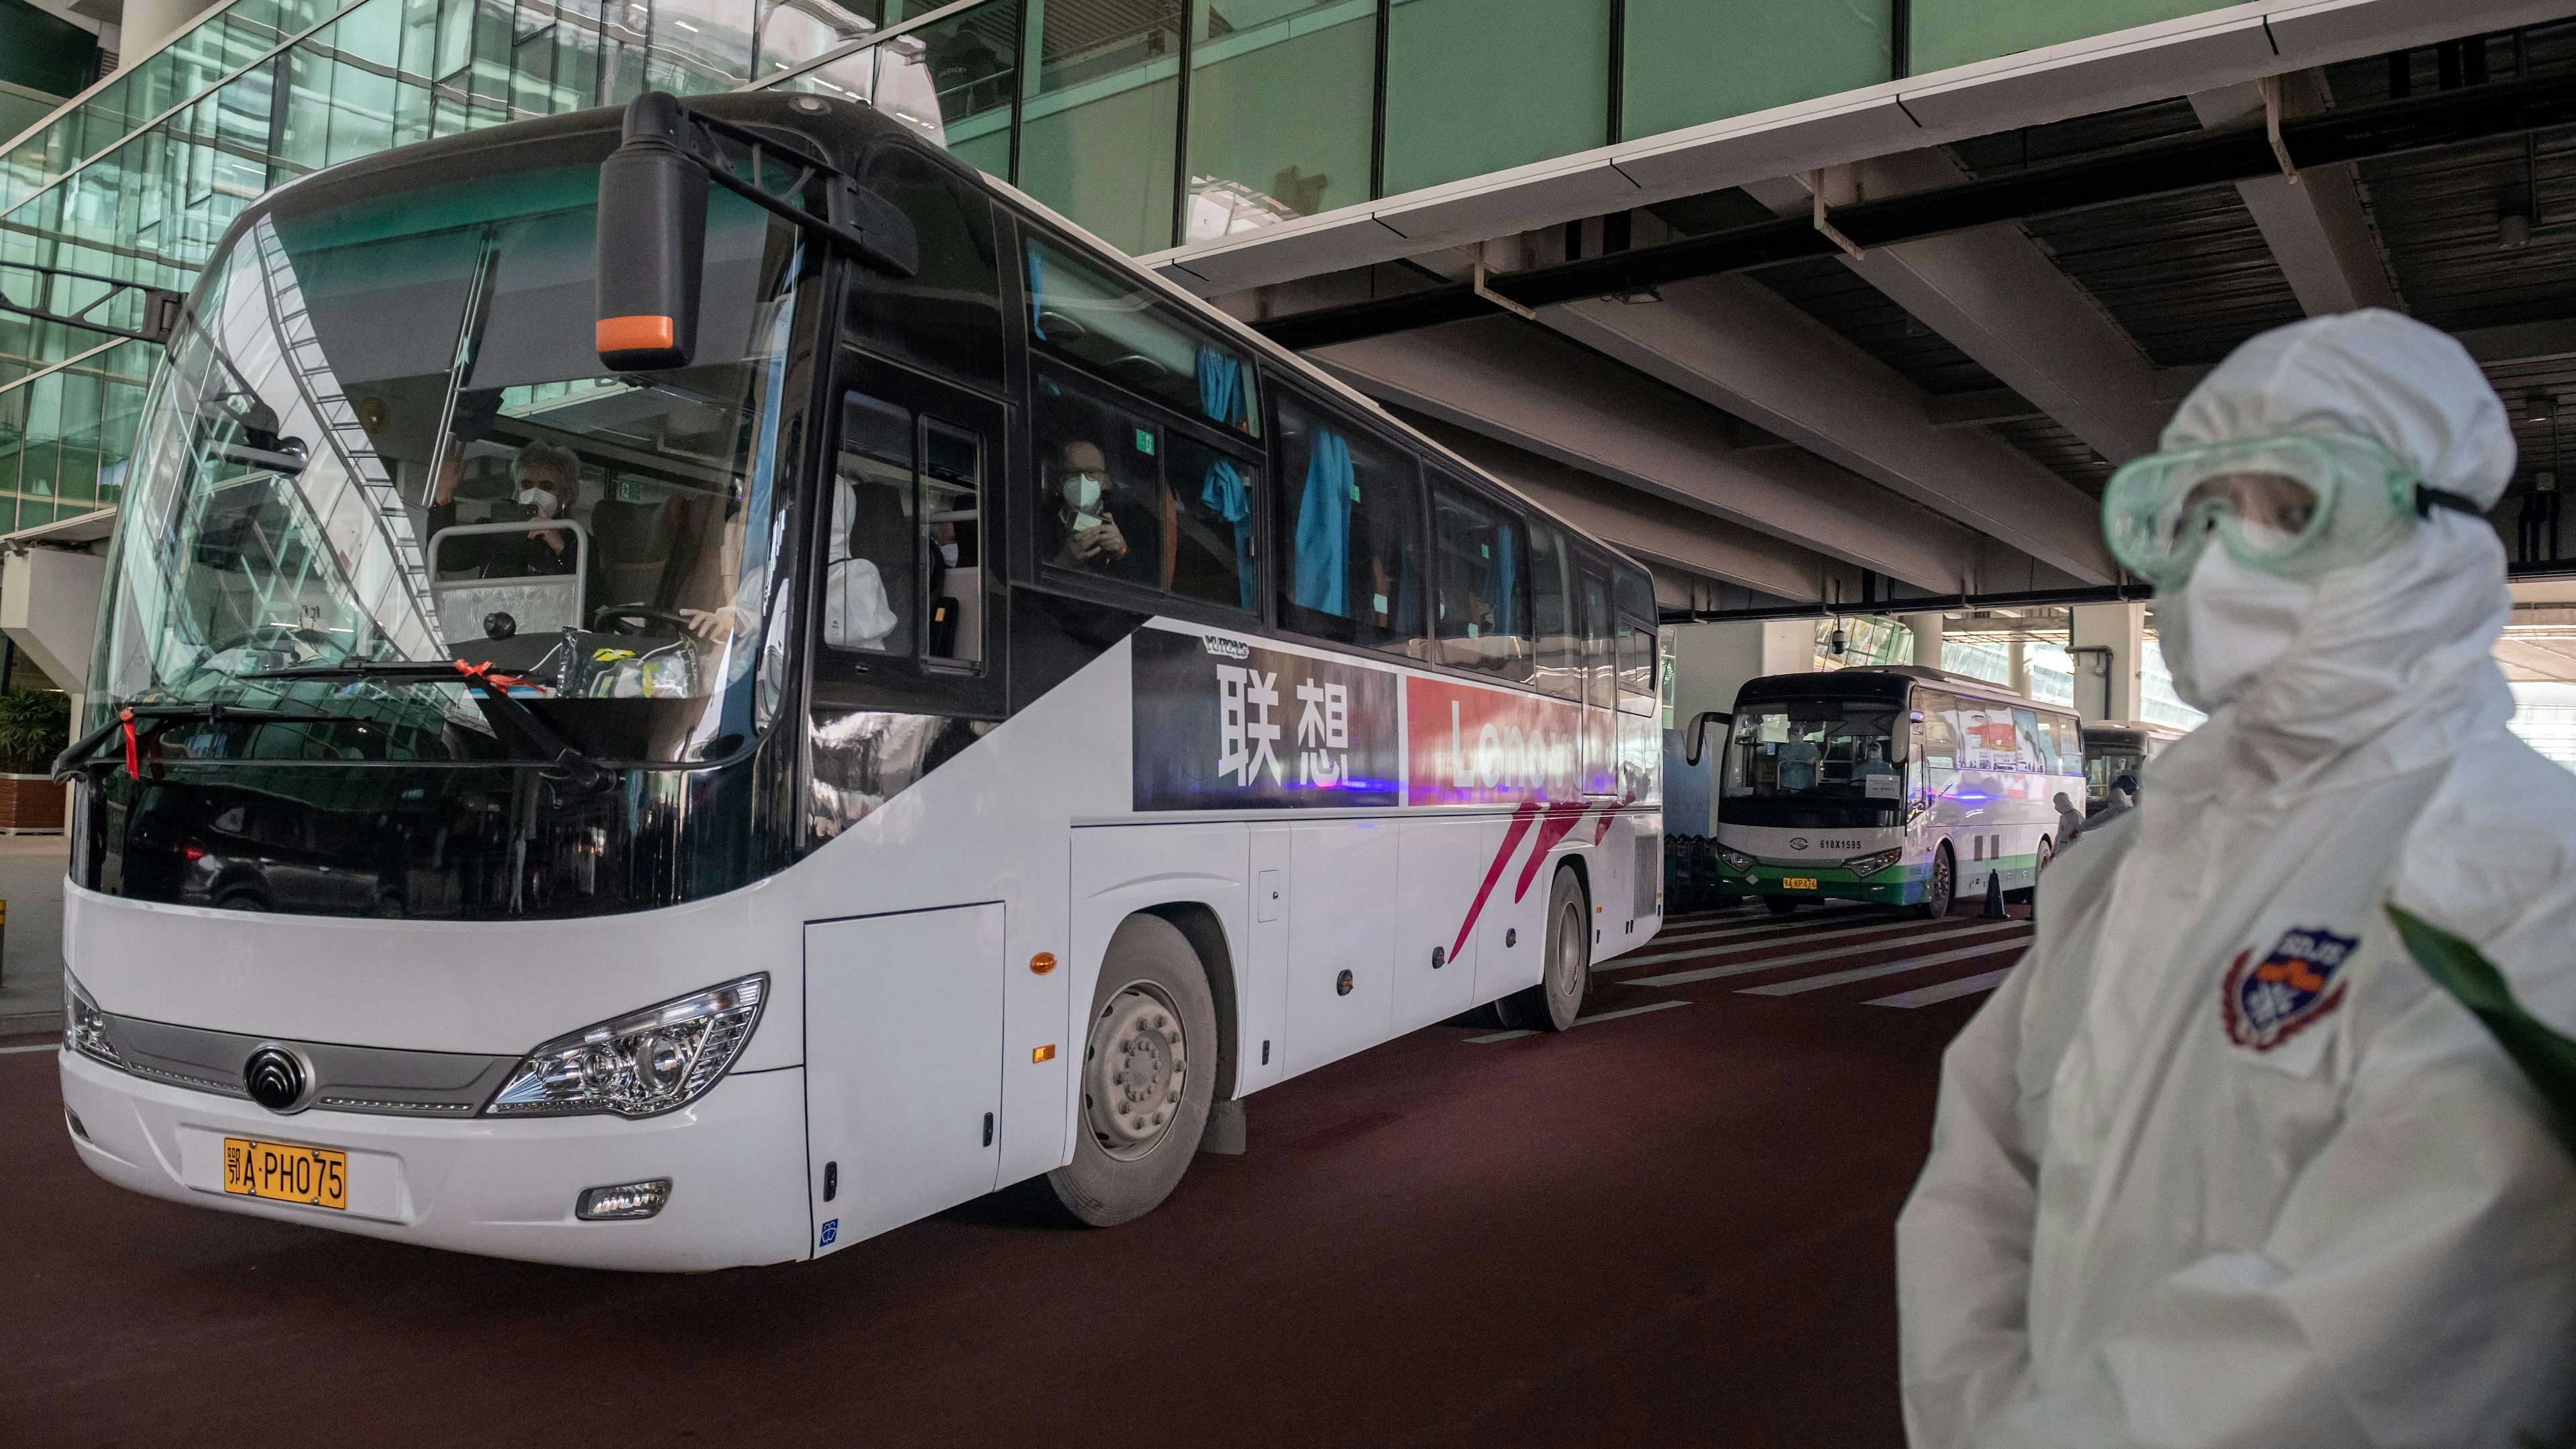 A bus carrying members of the World Health Organization (WHO) team investigating the origins of the Covid-19 pandemic leaves the airport following their arrival in Wuhan, China.